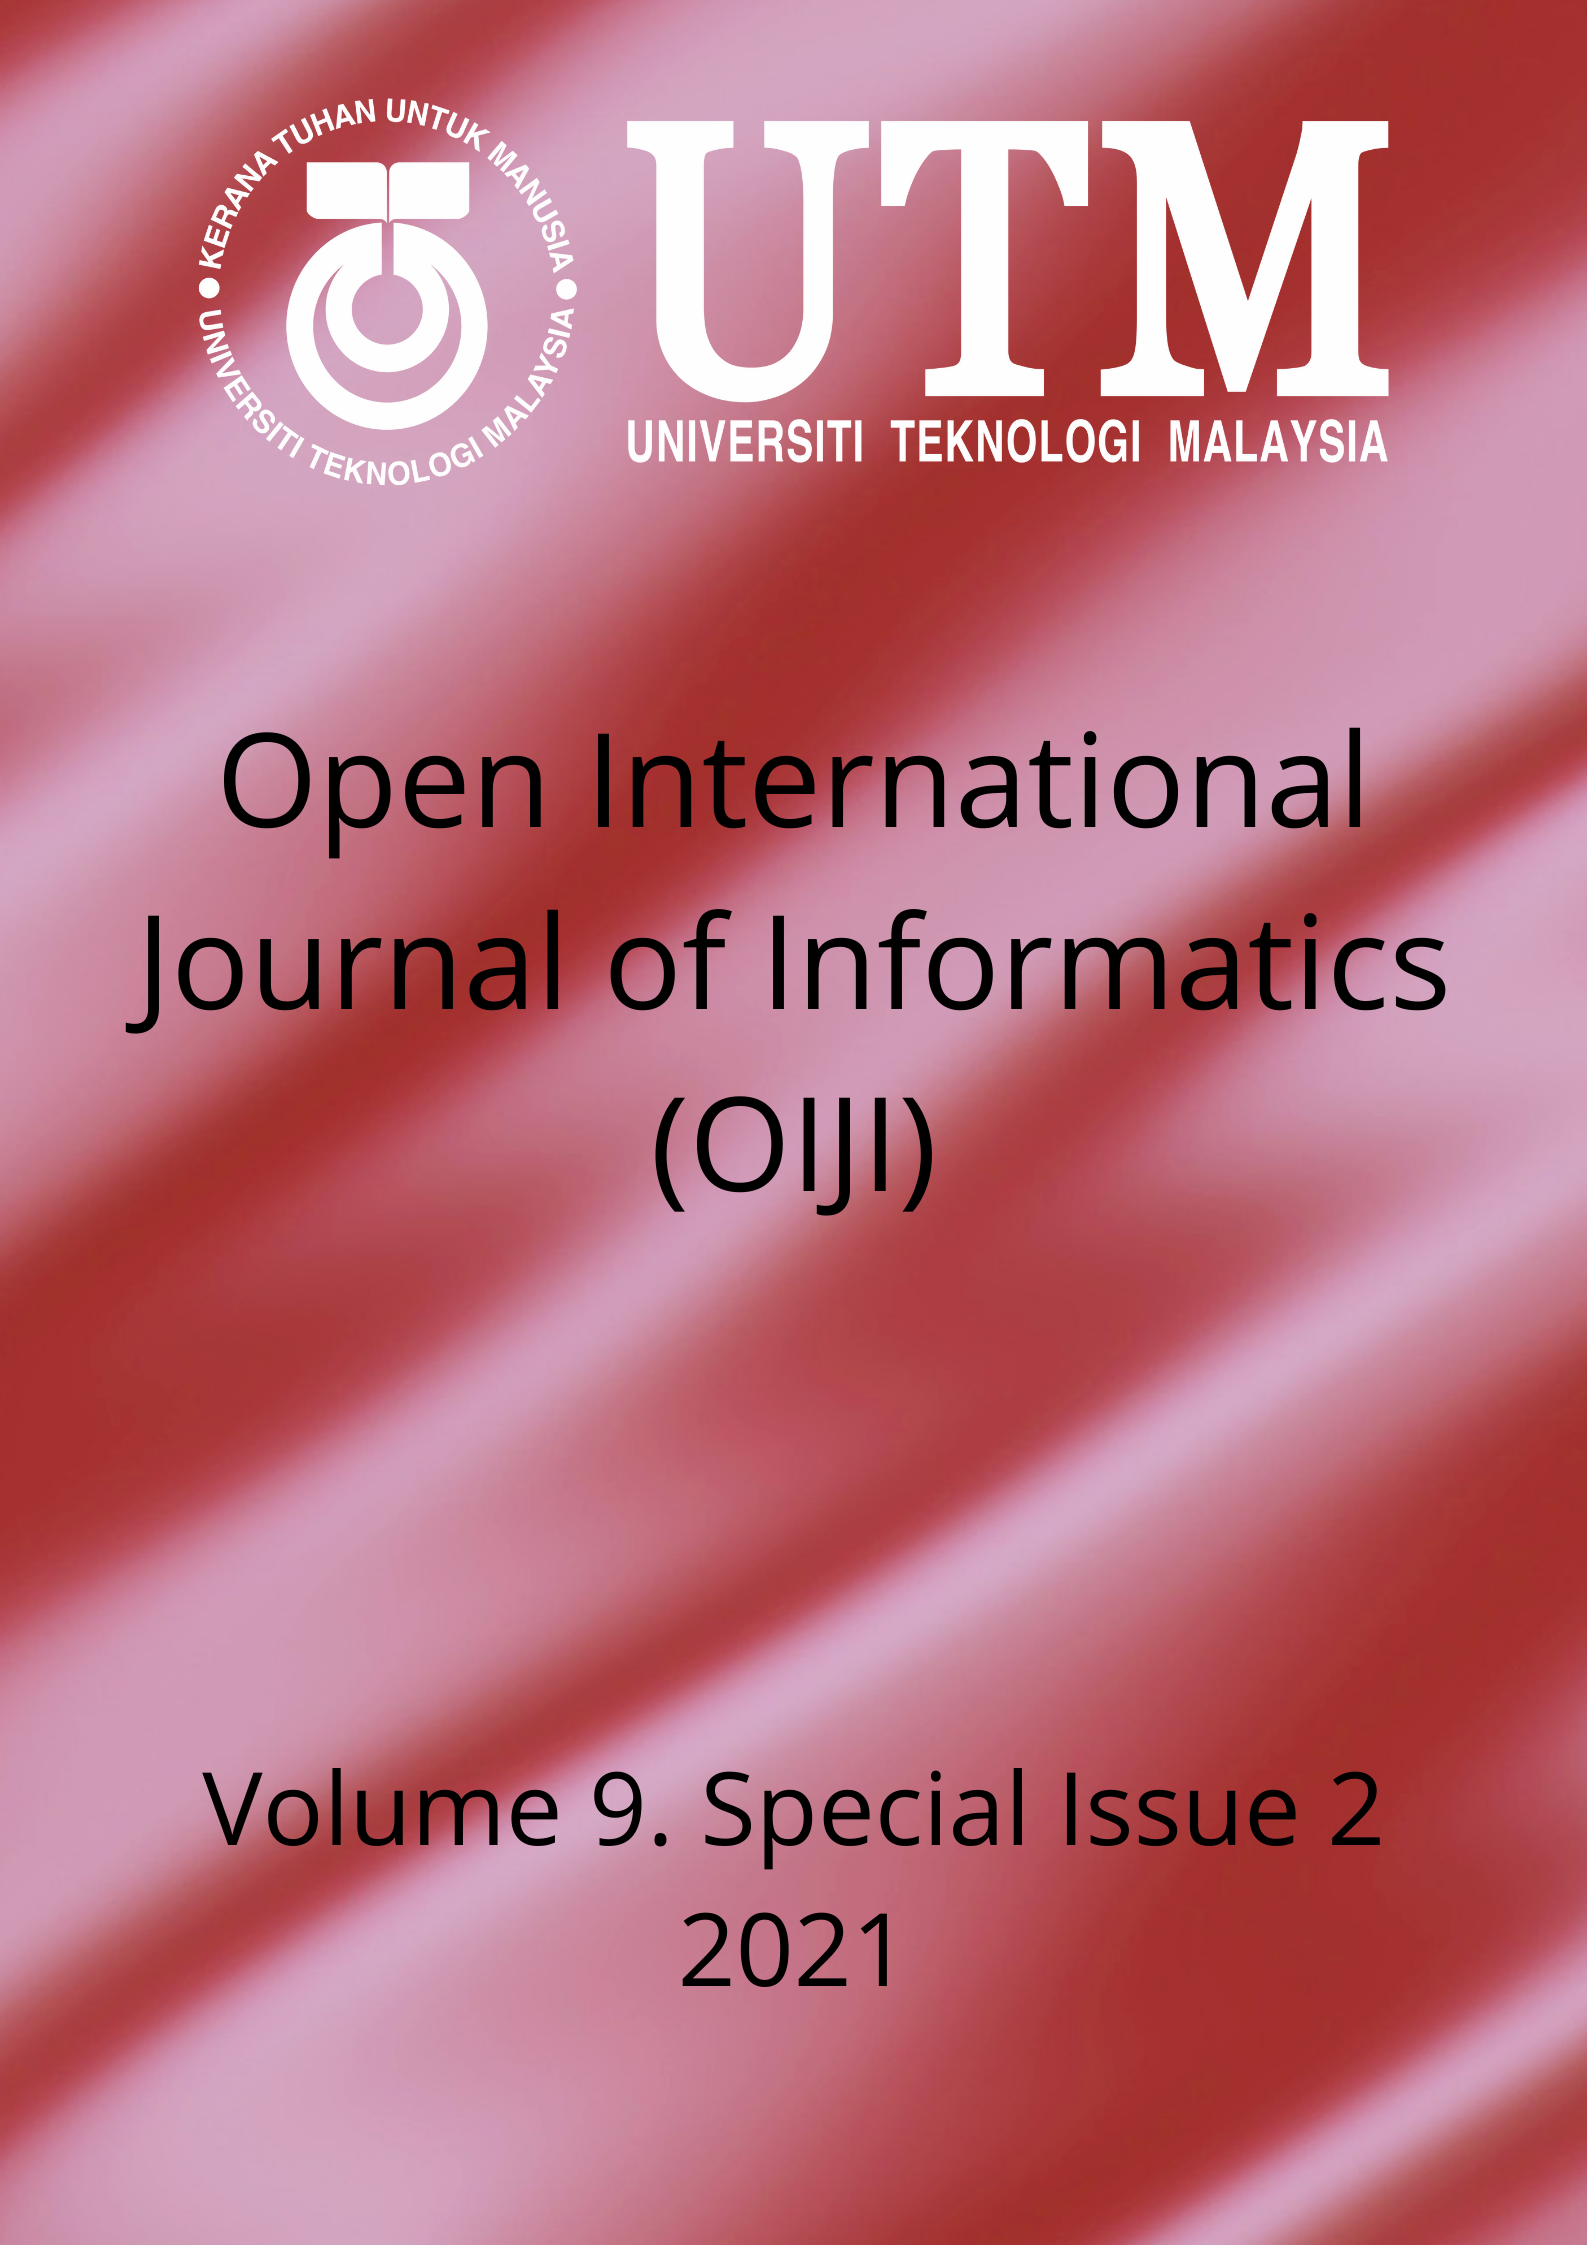 					View Vol. 9 No. Special Issue 2 (2021): Open International Journal of Informatics (OIJI) special session on Machine Learning
				